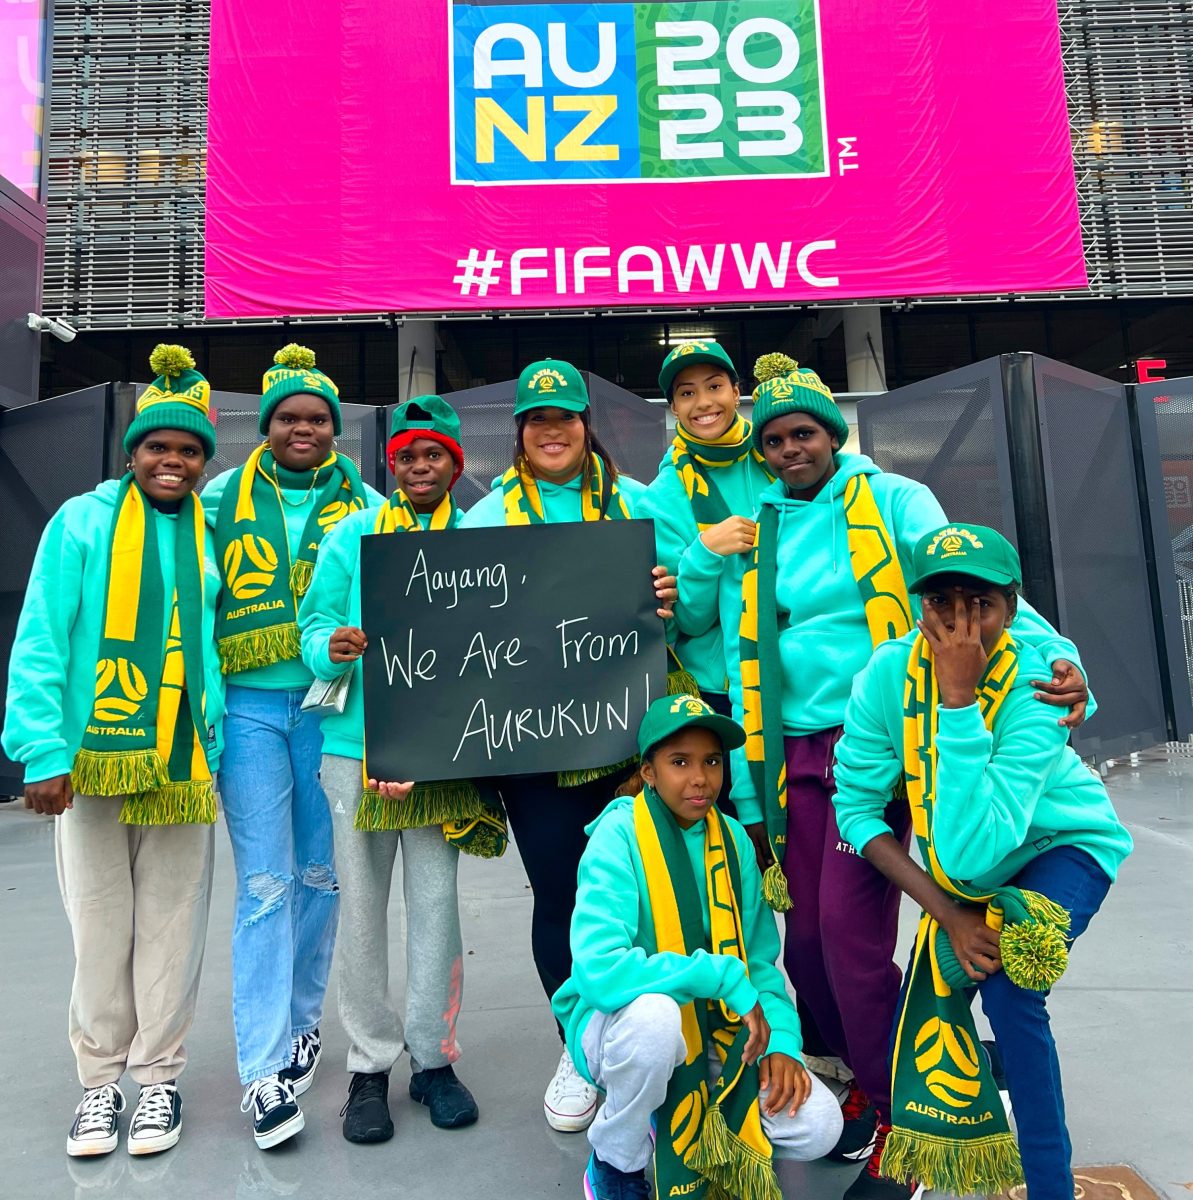 Eight women are posing in front of the FIFA Women's World Cup stadium. The two women in the middle are holding a black sign that reads "aayang, we are from Aurukun" in white handwriting.